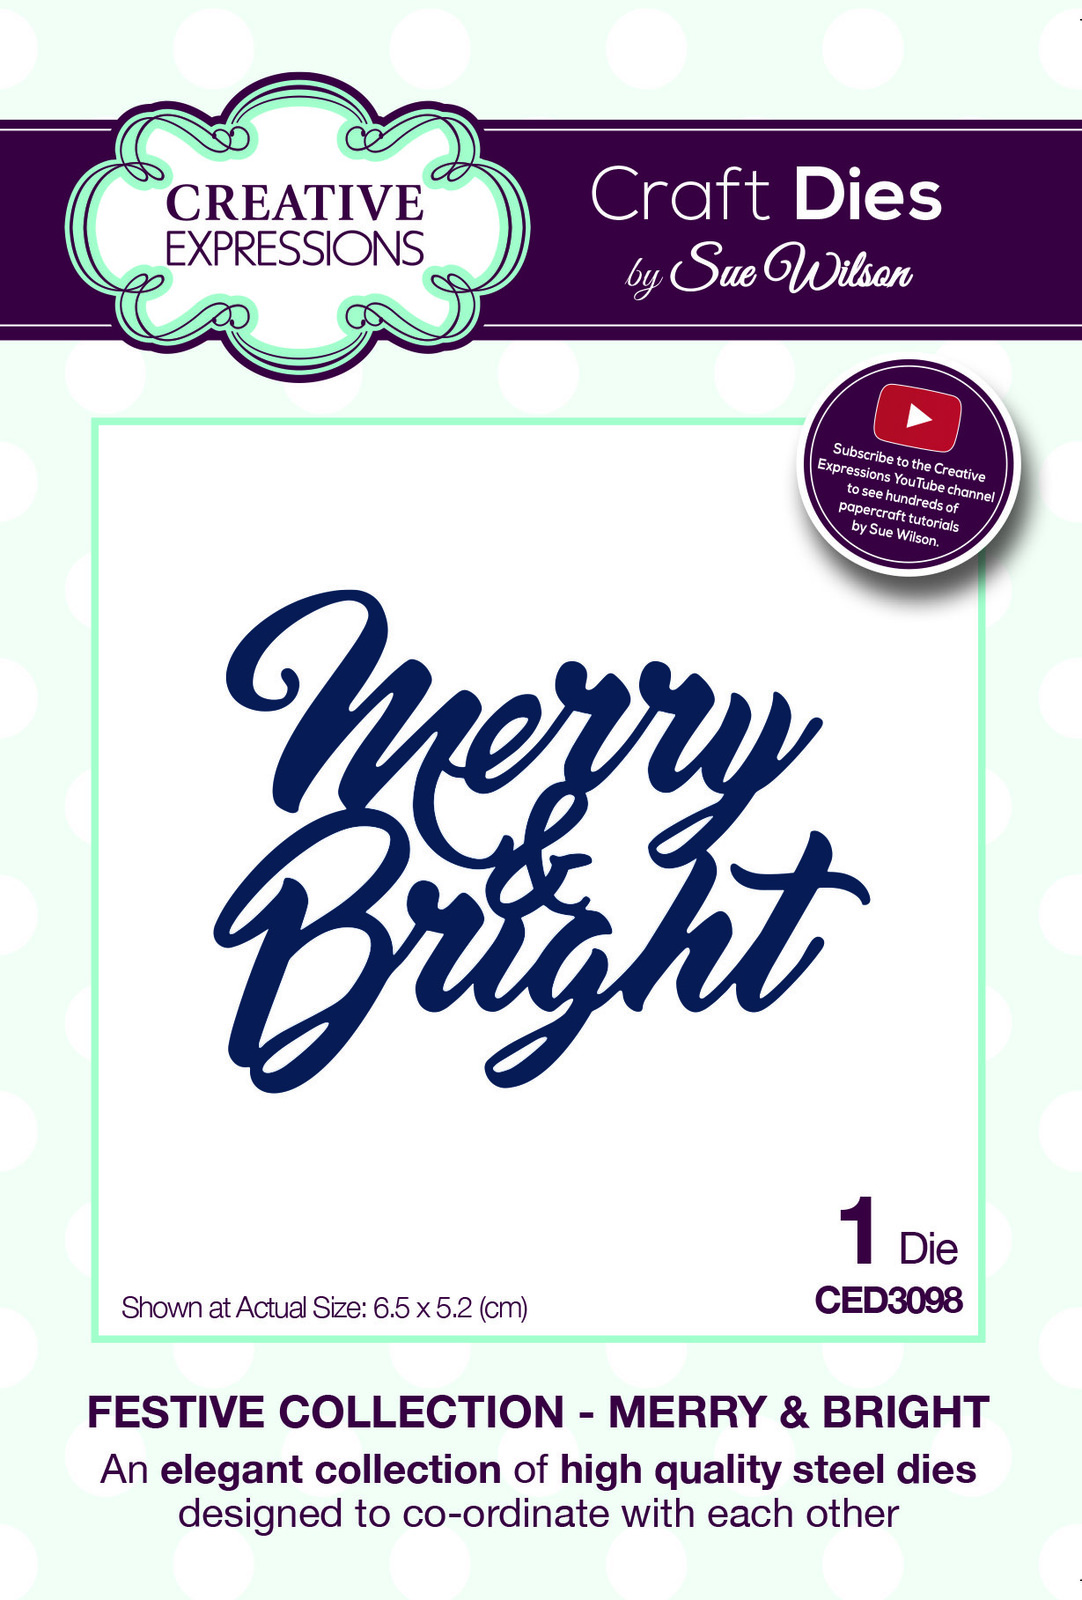 Sue Wilson Dies Festive Collection Merry & Bright CED3098